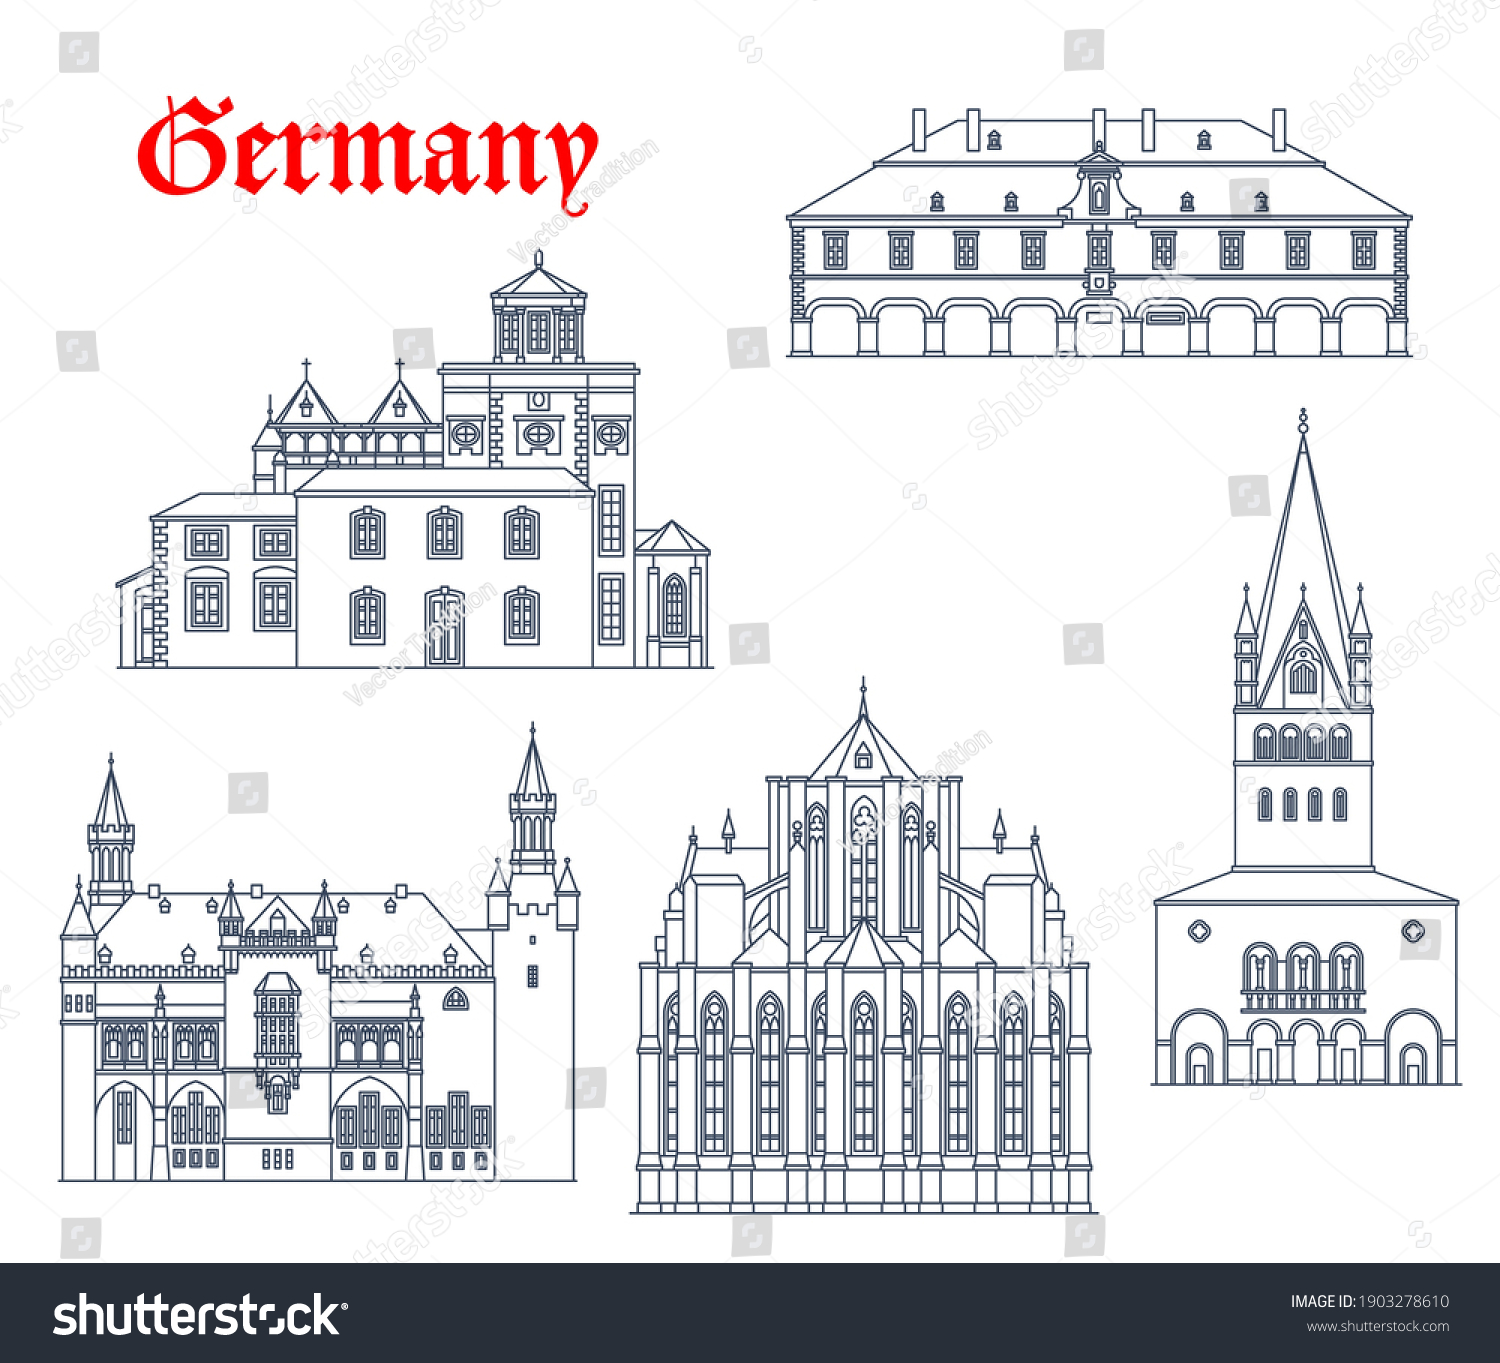 SVG of Germany landmark buildings and travel icons, Aachen churches architecture vector icons. Germany landmarks of Soest rathaus and Altneberg cathedral, Bergischer Dom and St Kornelius and Patrokli church svg